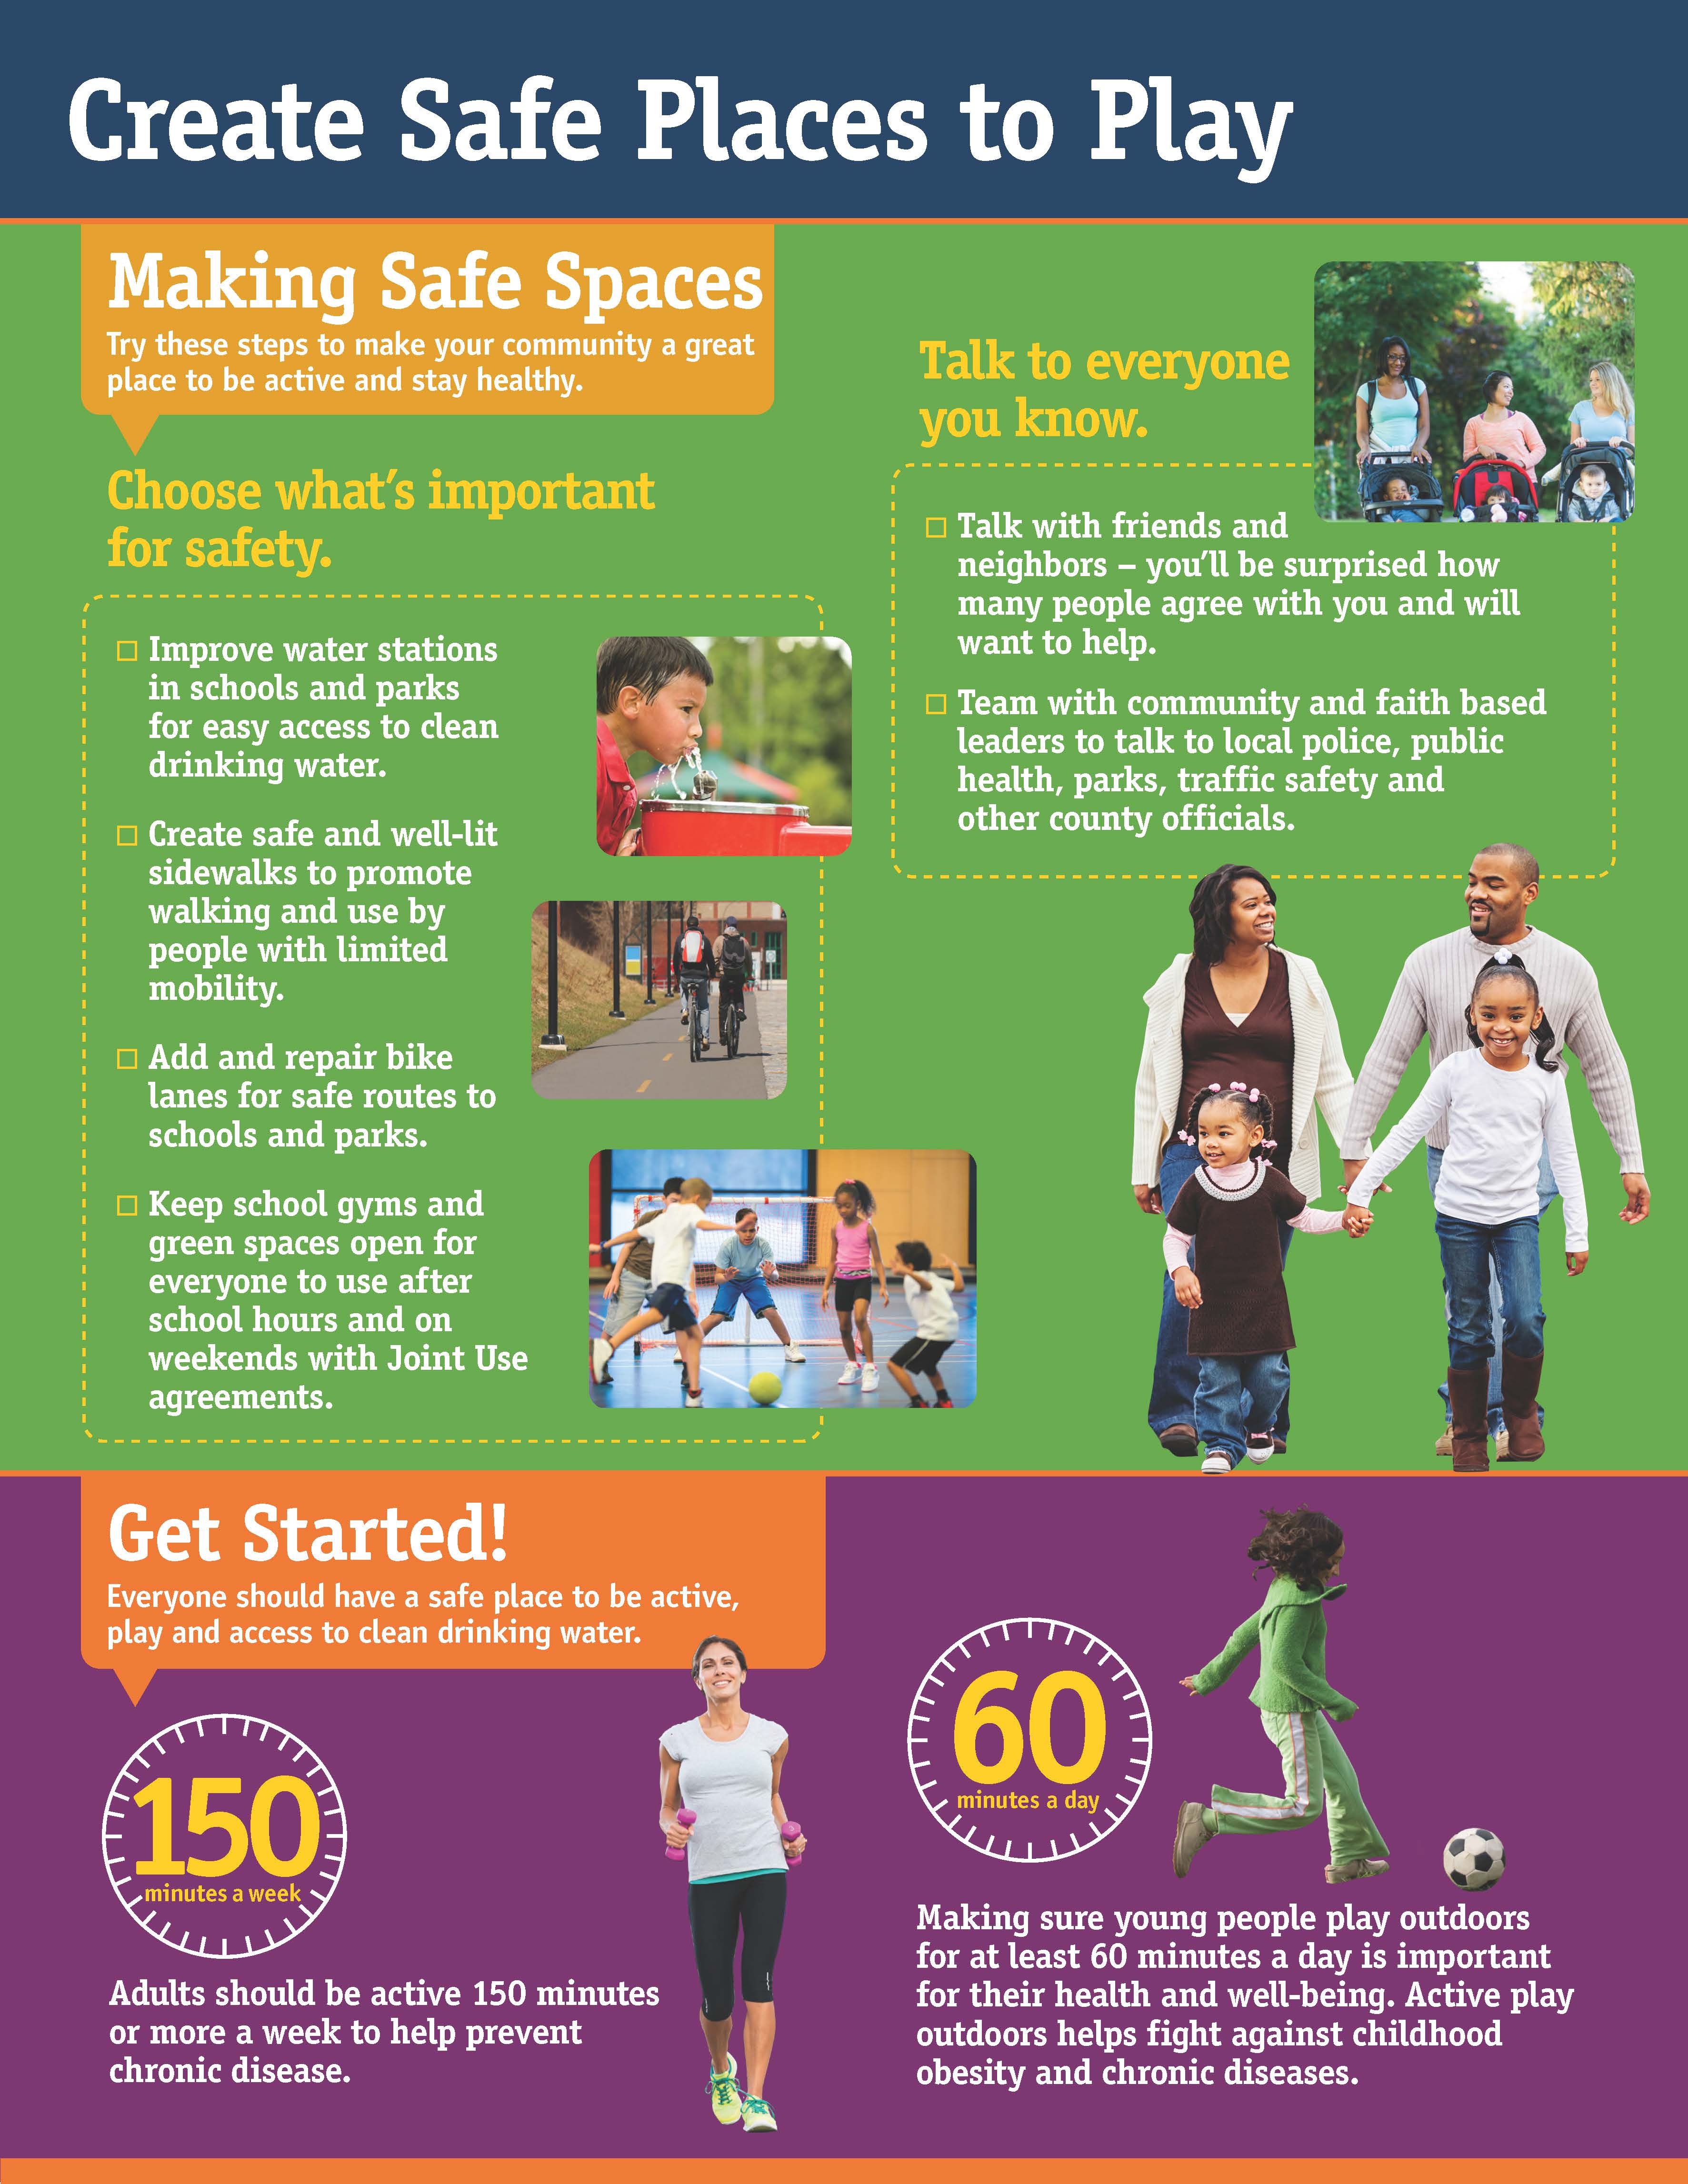 Image of Create Safe Places to Play PDF.